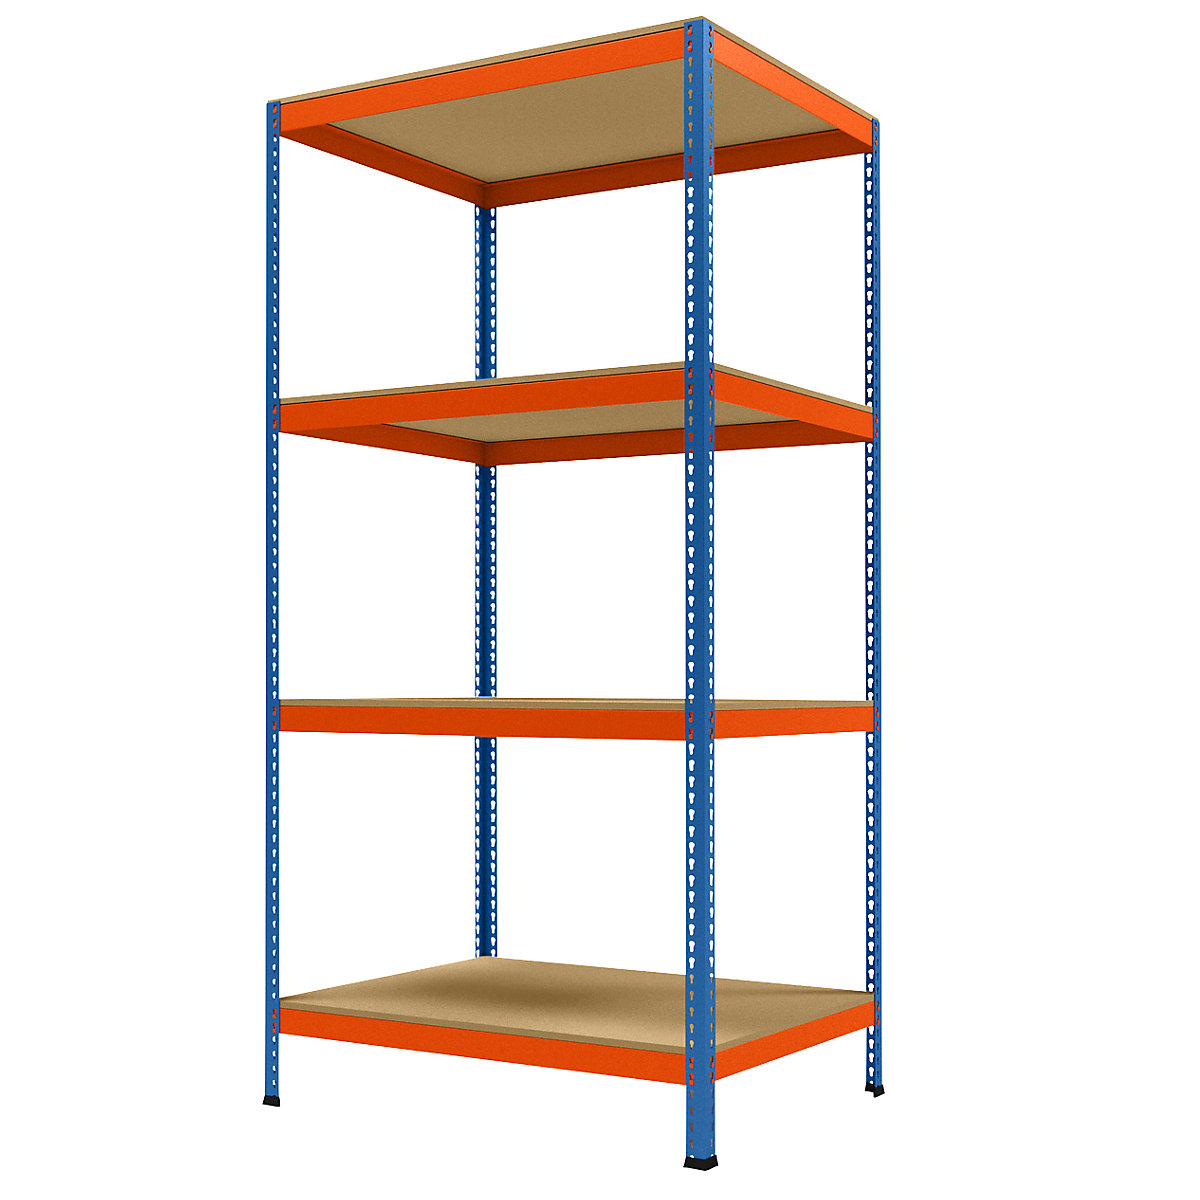 Wide span heavy duty shelving, height 2438 mm, overall depth 926 mm, width 1231 mm